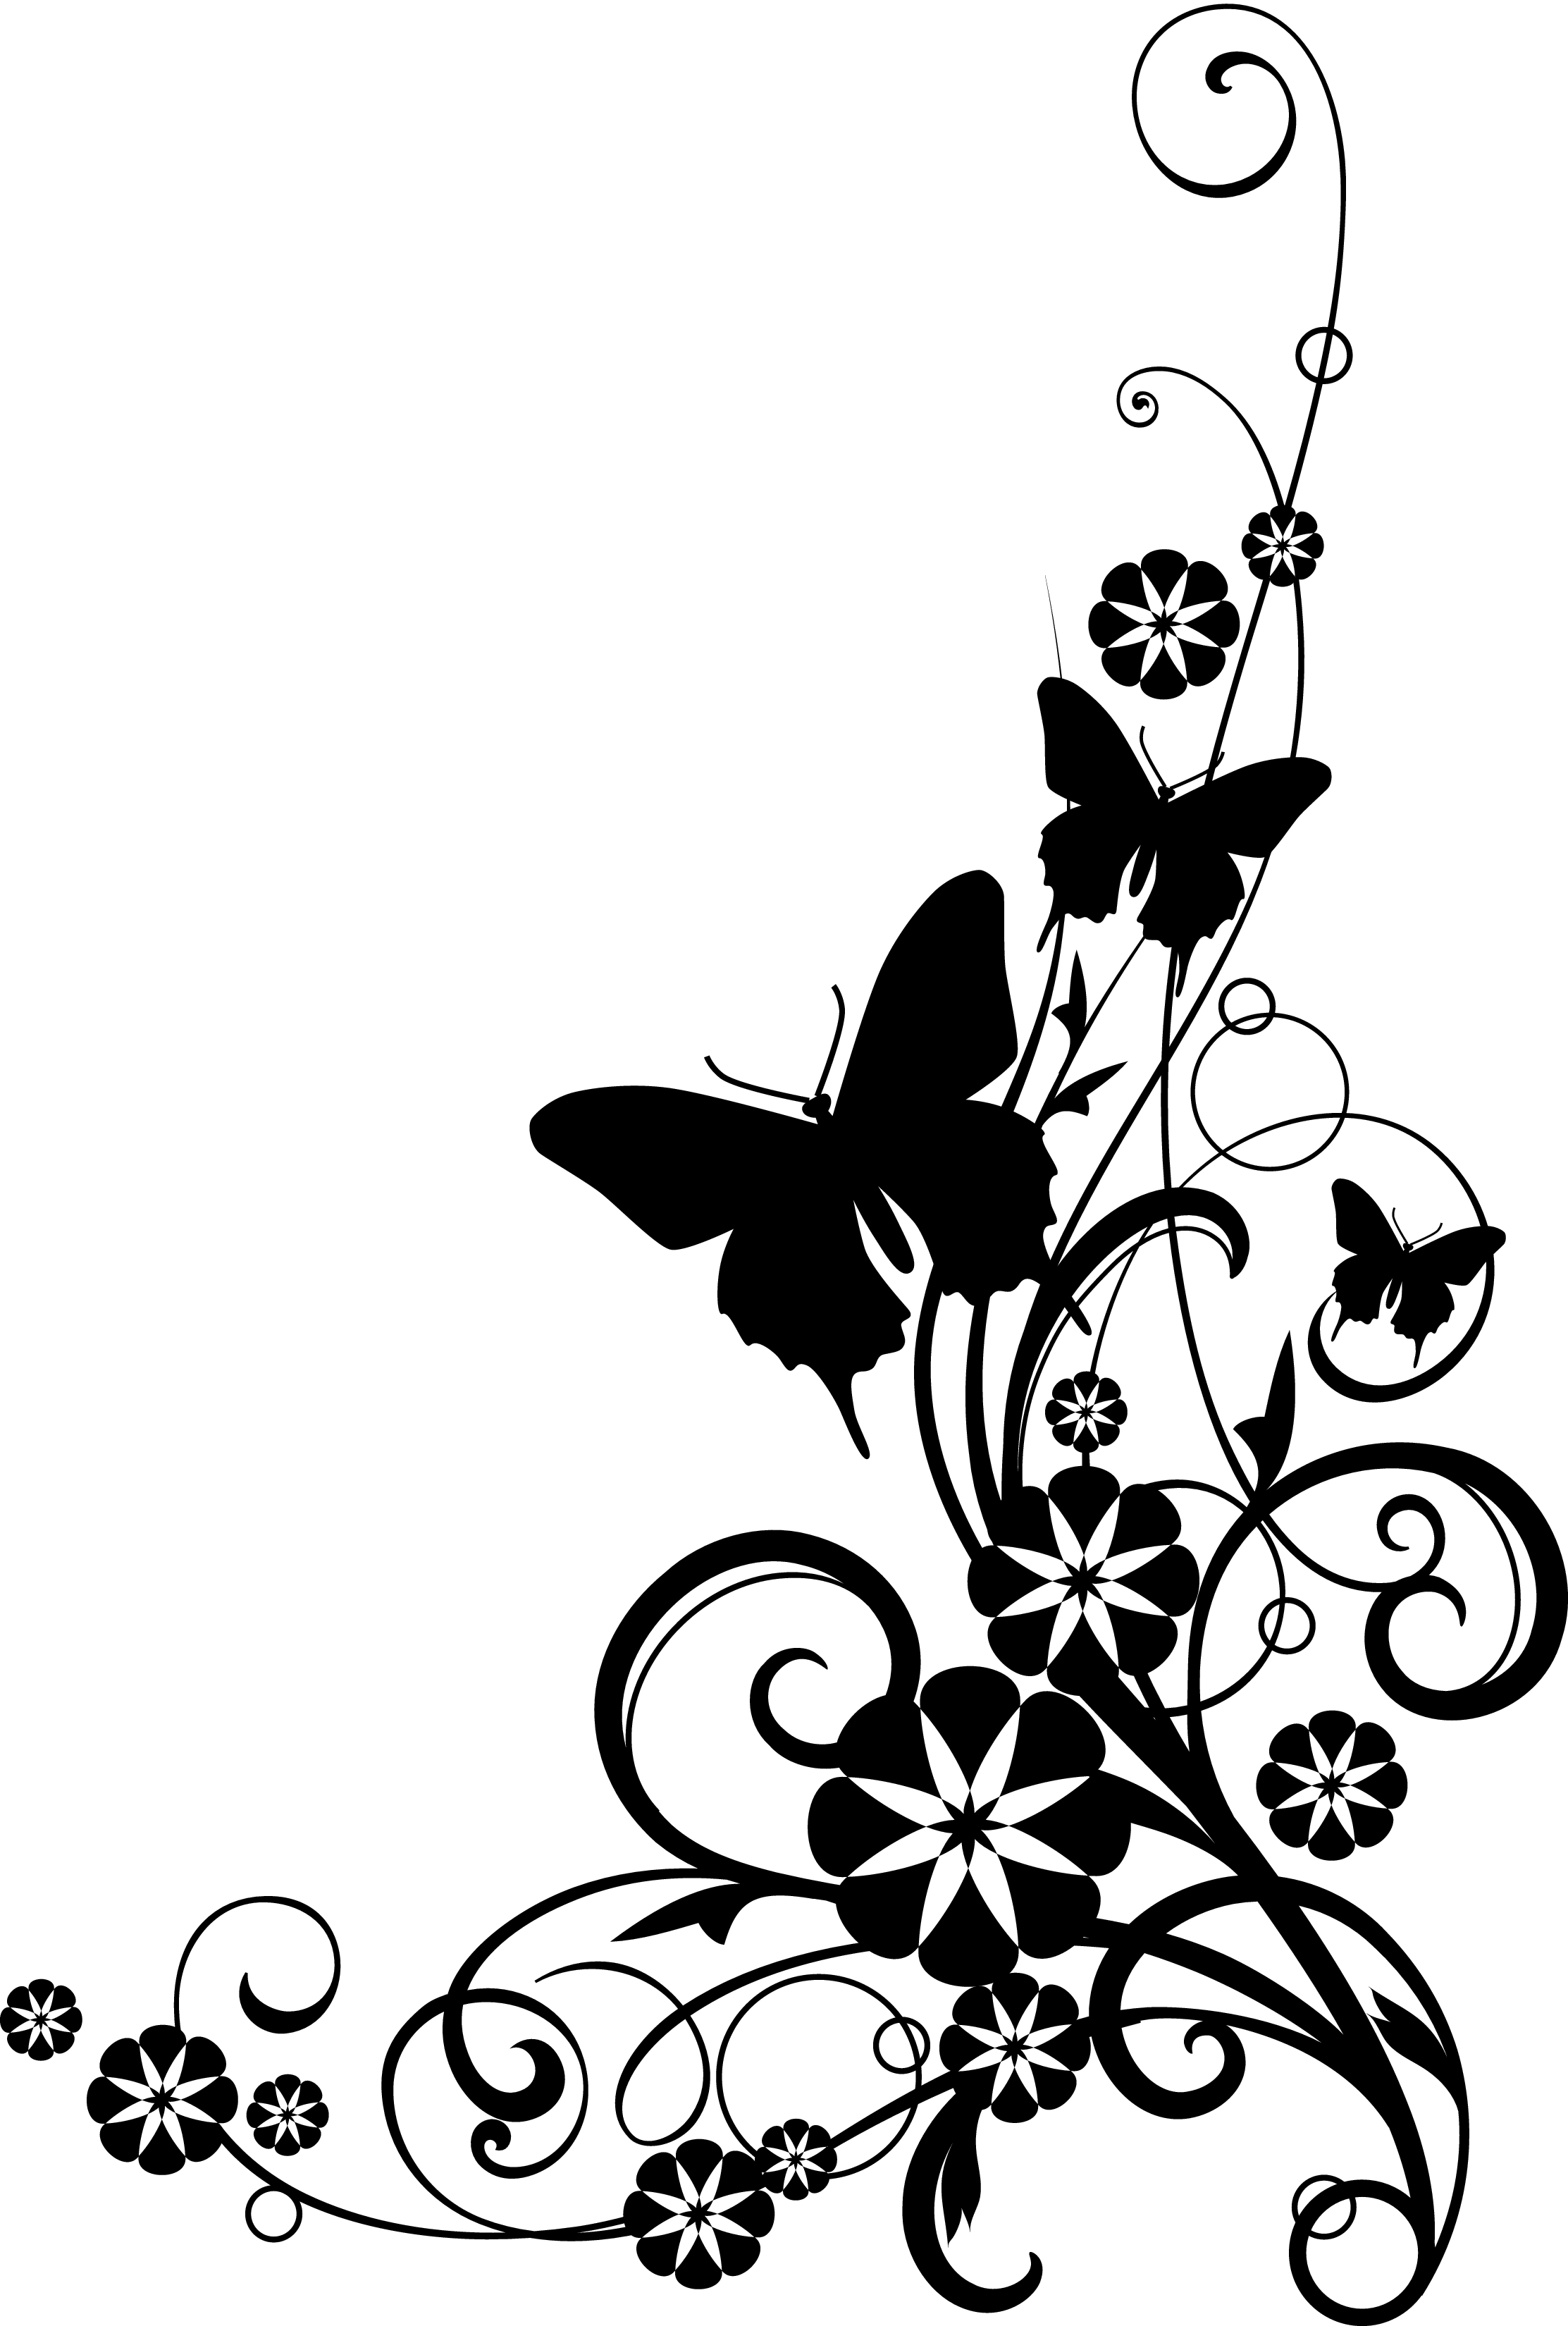 Black And White Flower Border Clipart PNG Transparent Background, Free